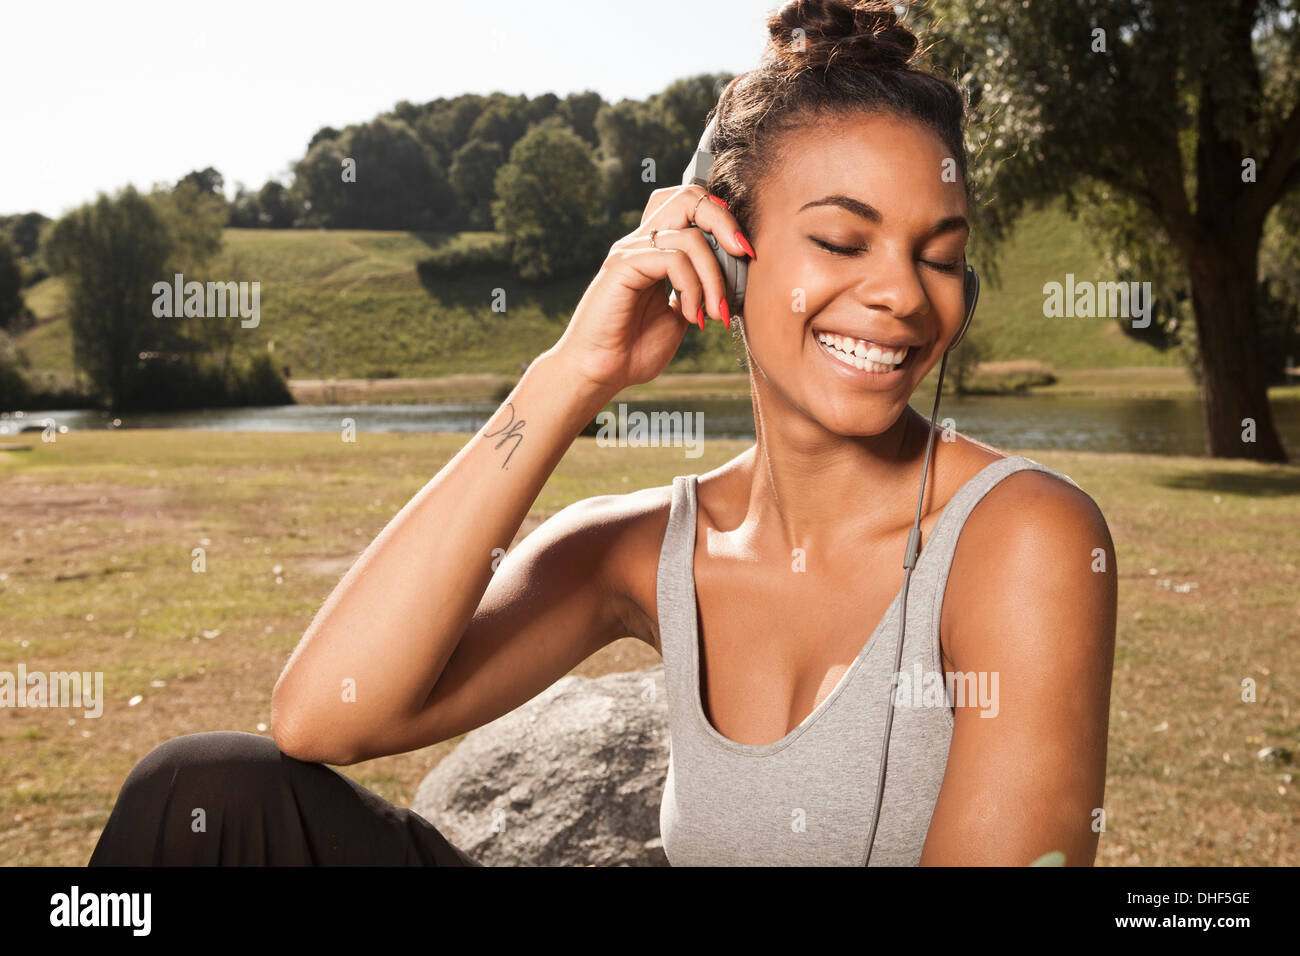 Young woman enjoying music in park Stock Photo